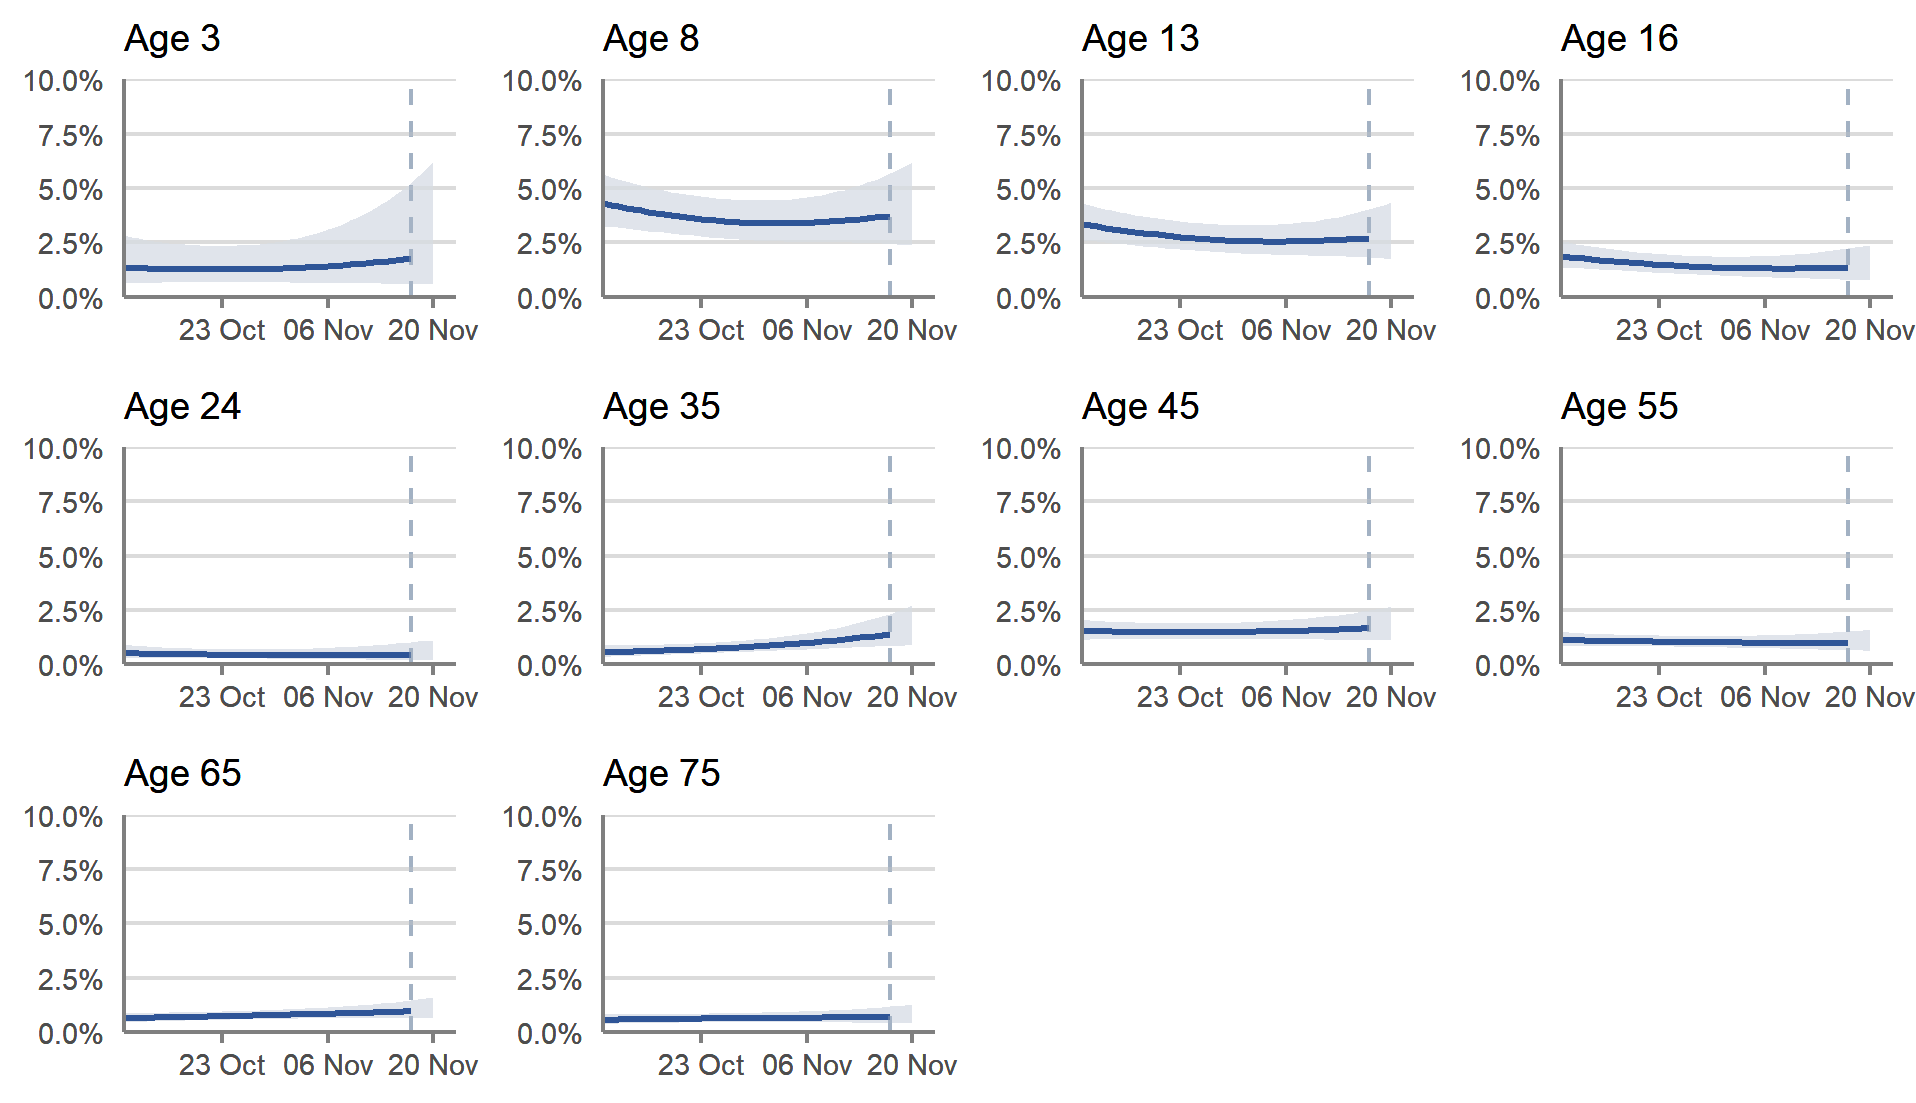 This chart shows the percentage of people testing positive for COVID-19 by reference age, between 10 October and 20 November 2021. These estimates are based on modelled daily estimates of the percentage of the private residential population testing positive for COVID-19 in Scotland by single year of age.  In Scotland, in the most recent week, the percentage testing positive appears to have increased in those aged around 30 to 50 years, but the trend was uncertain for all other ages.